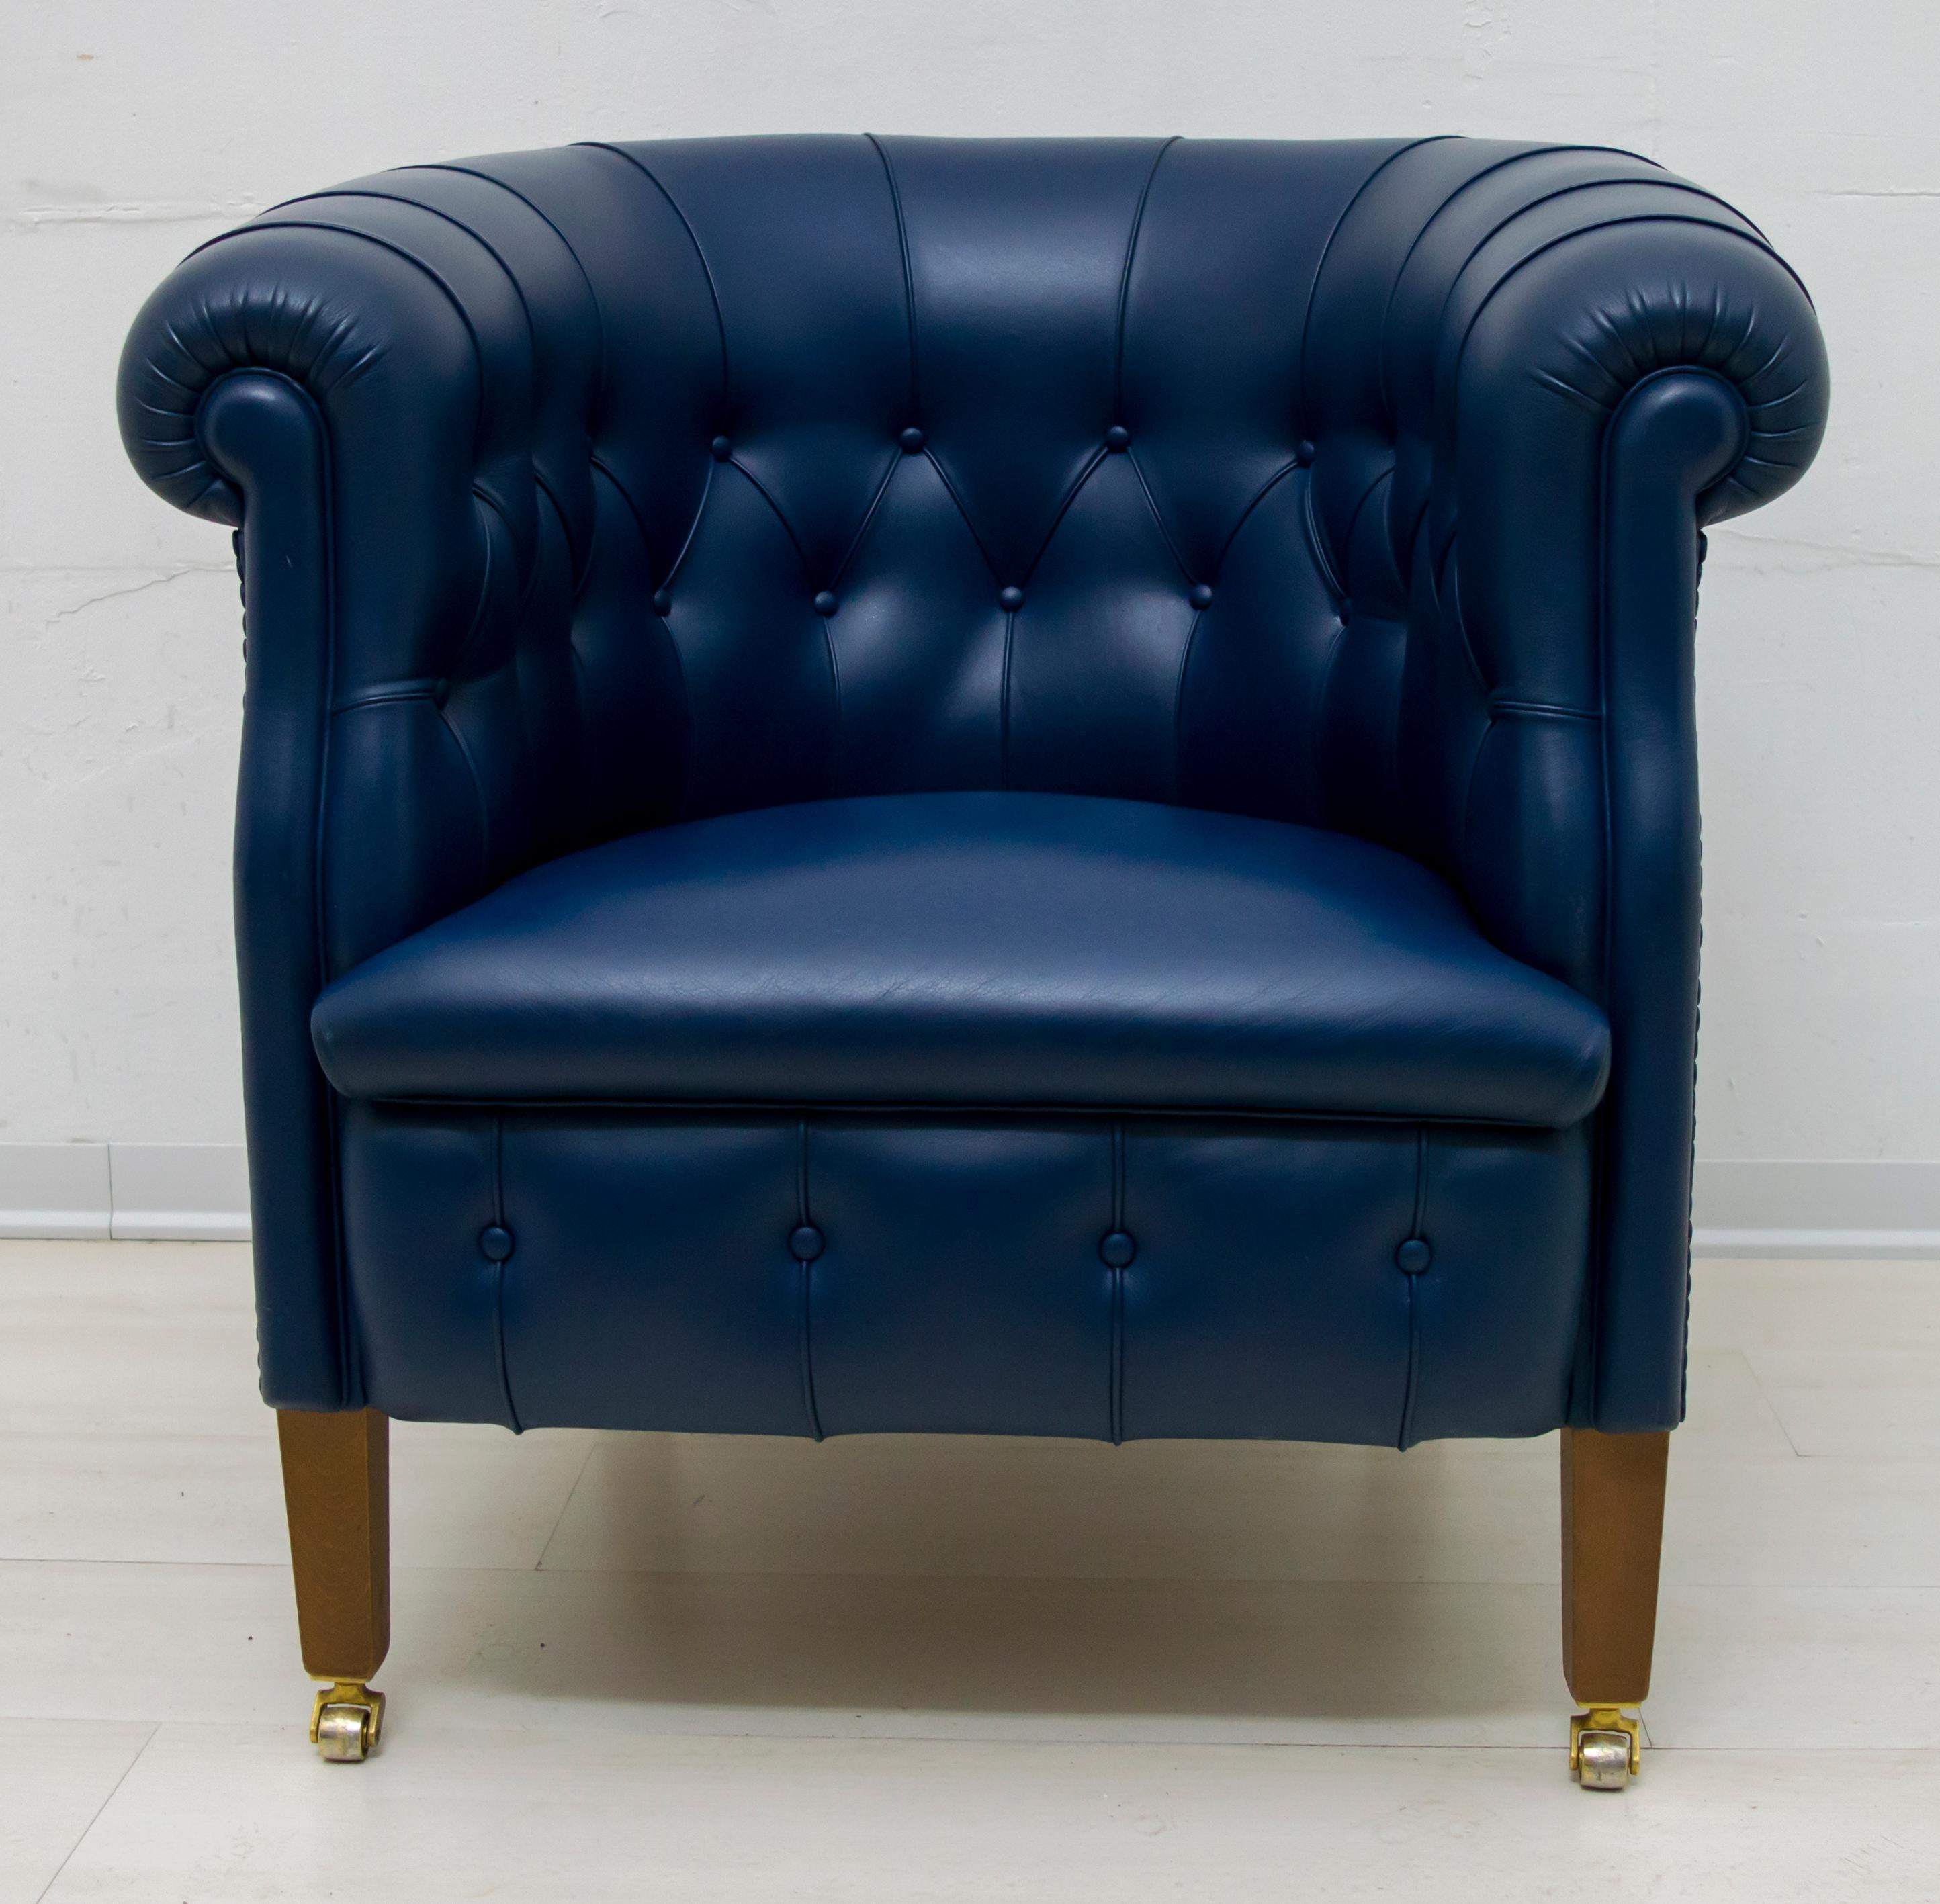 This armchair is part of the 